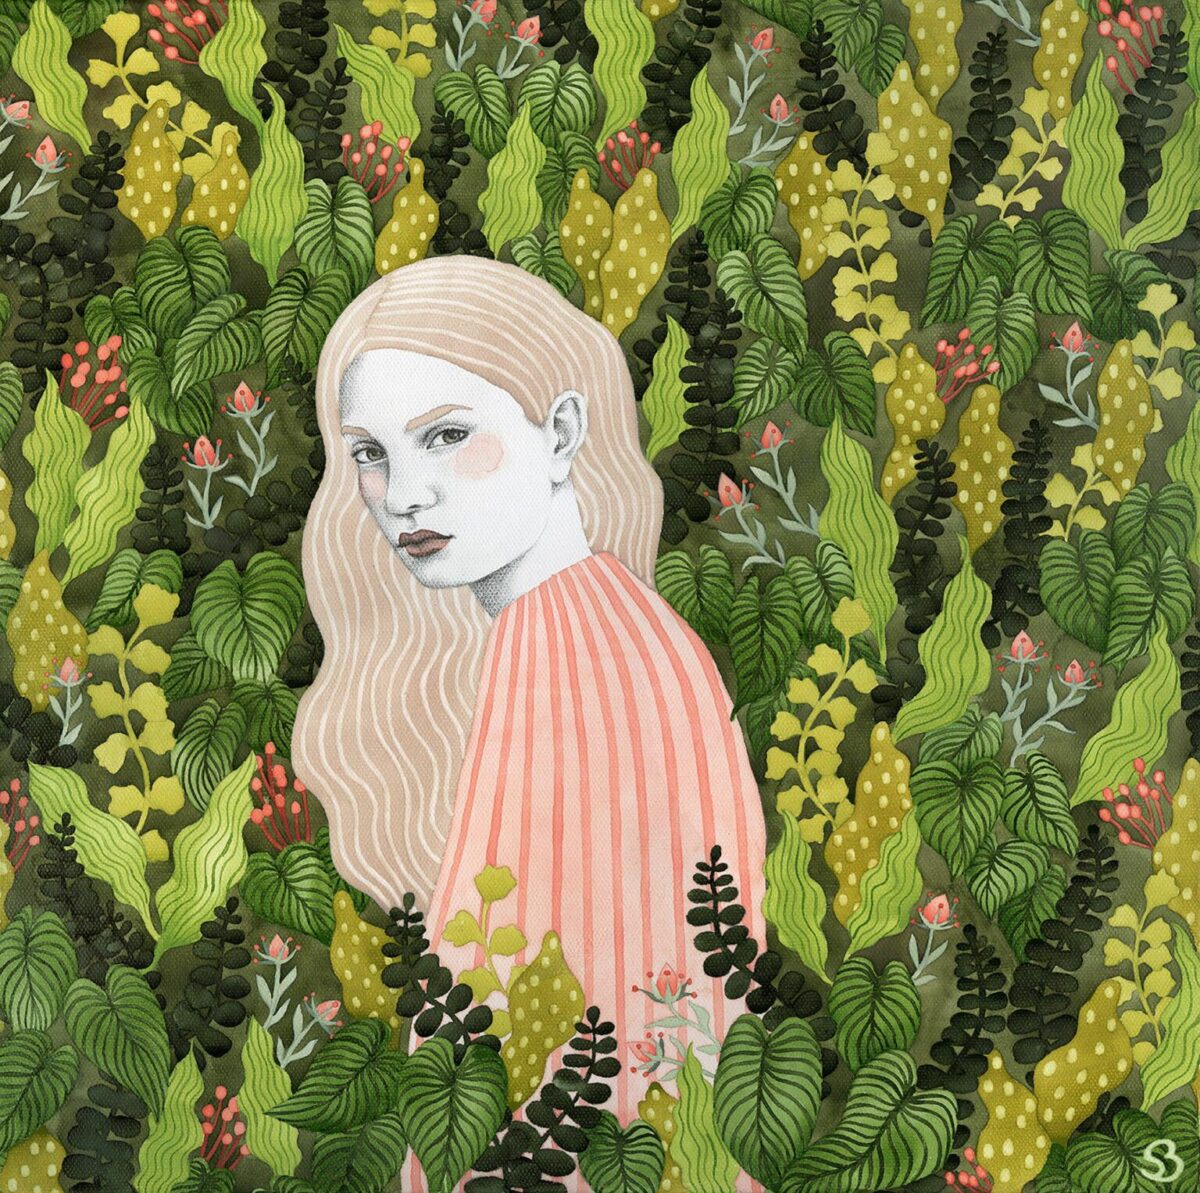 Gorgeous Female Portraits Decorated With Abstract And Floral Patterns By Sofia Bonati 11